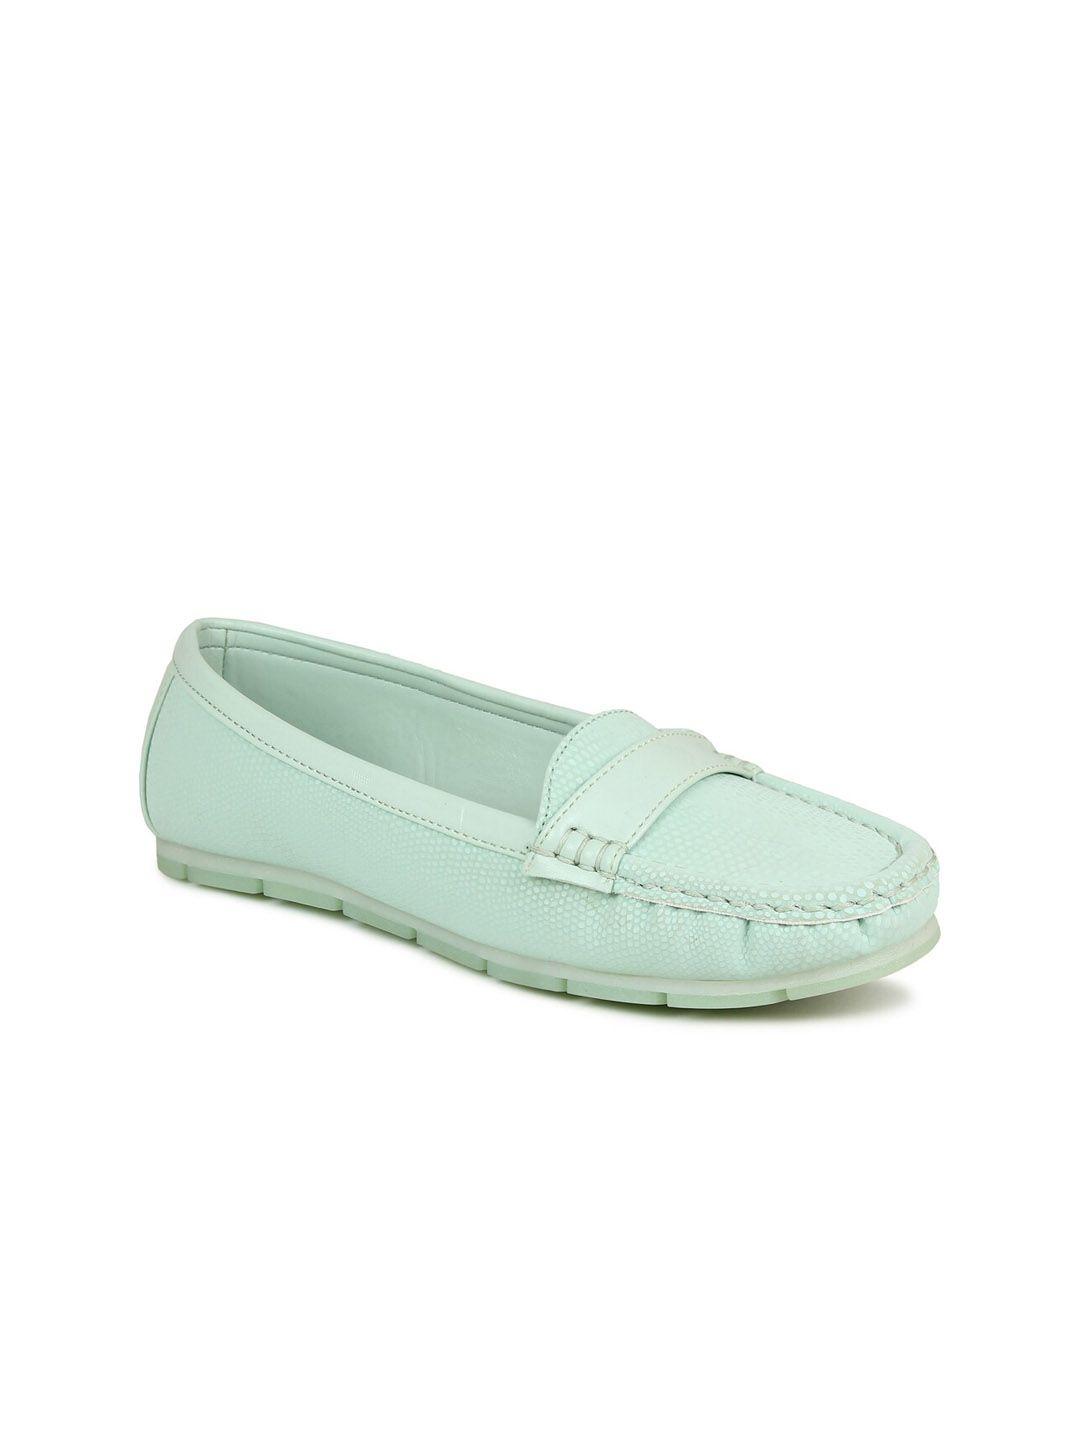 inc 5 women solid loafers